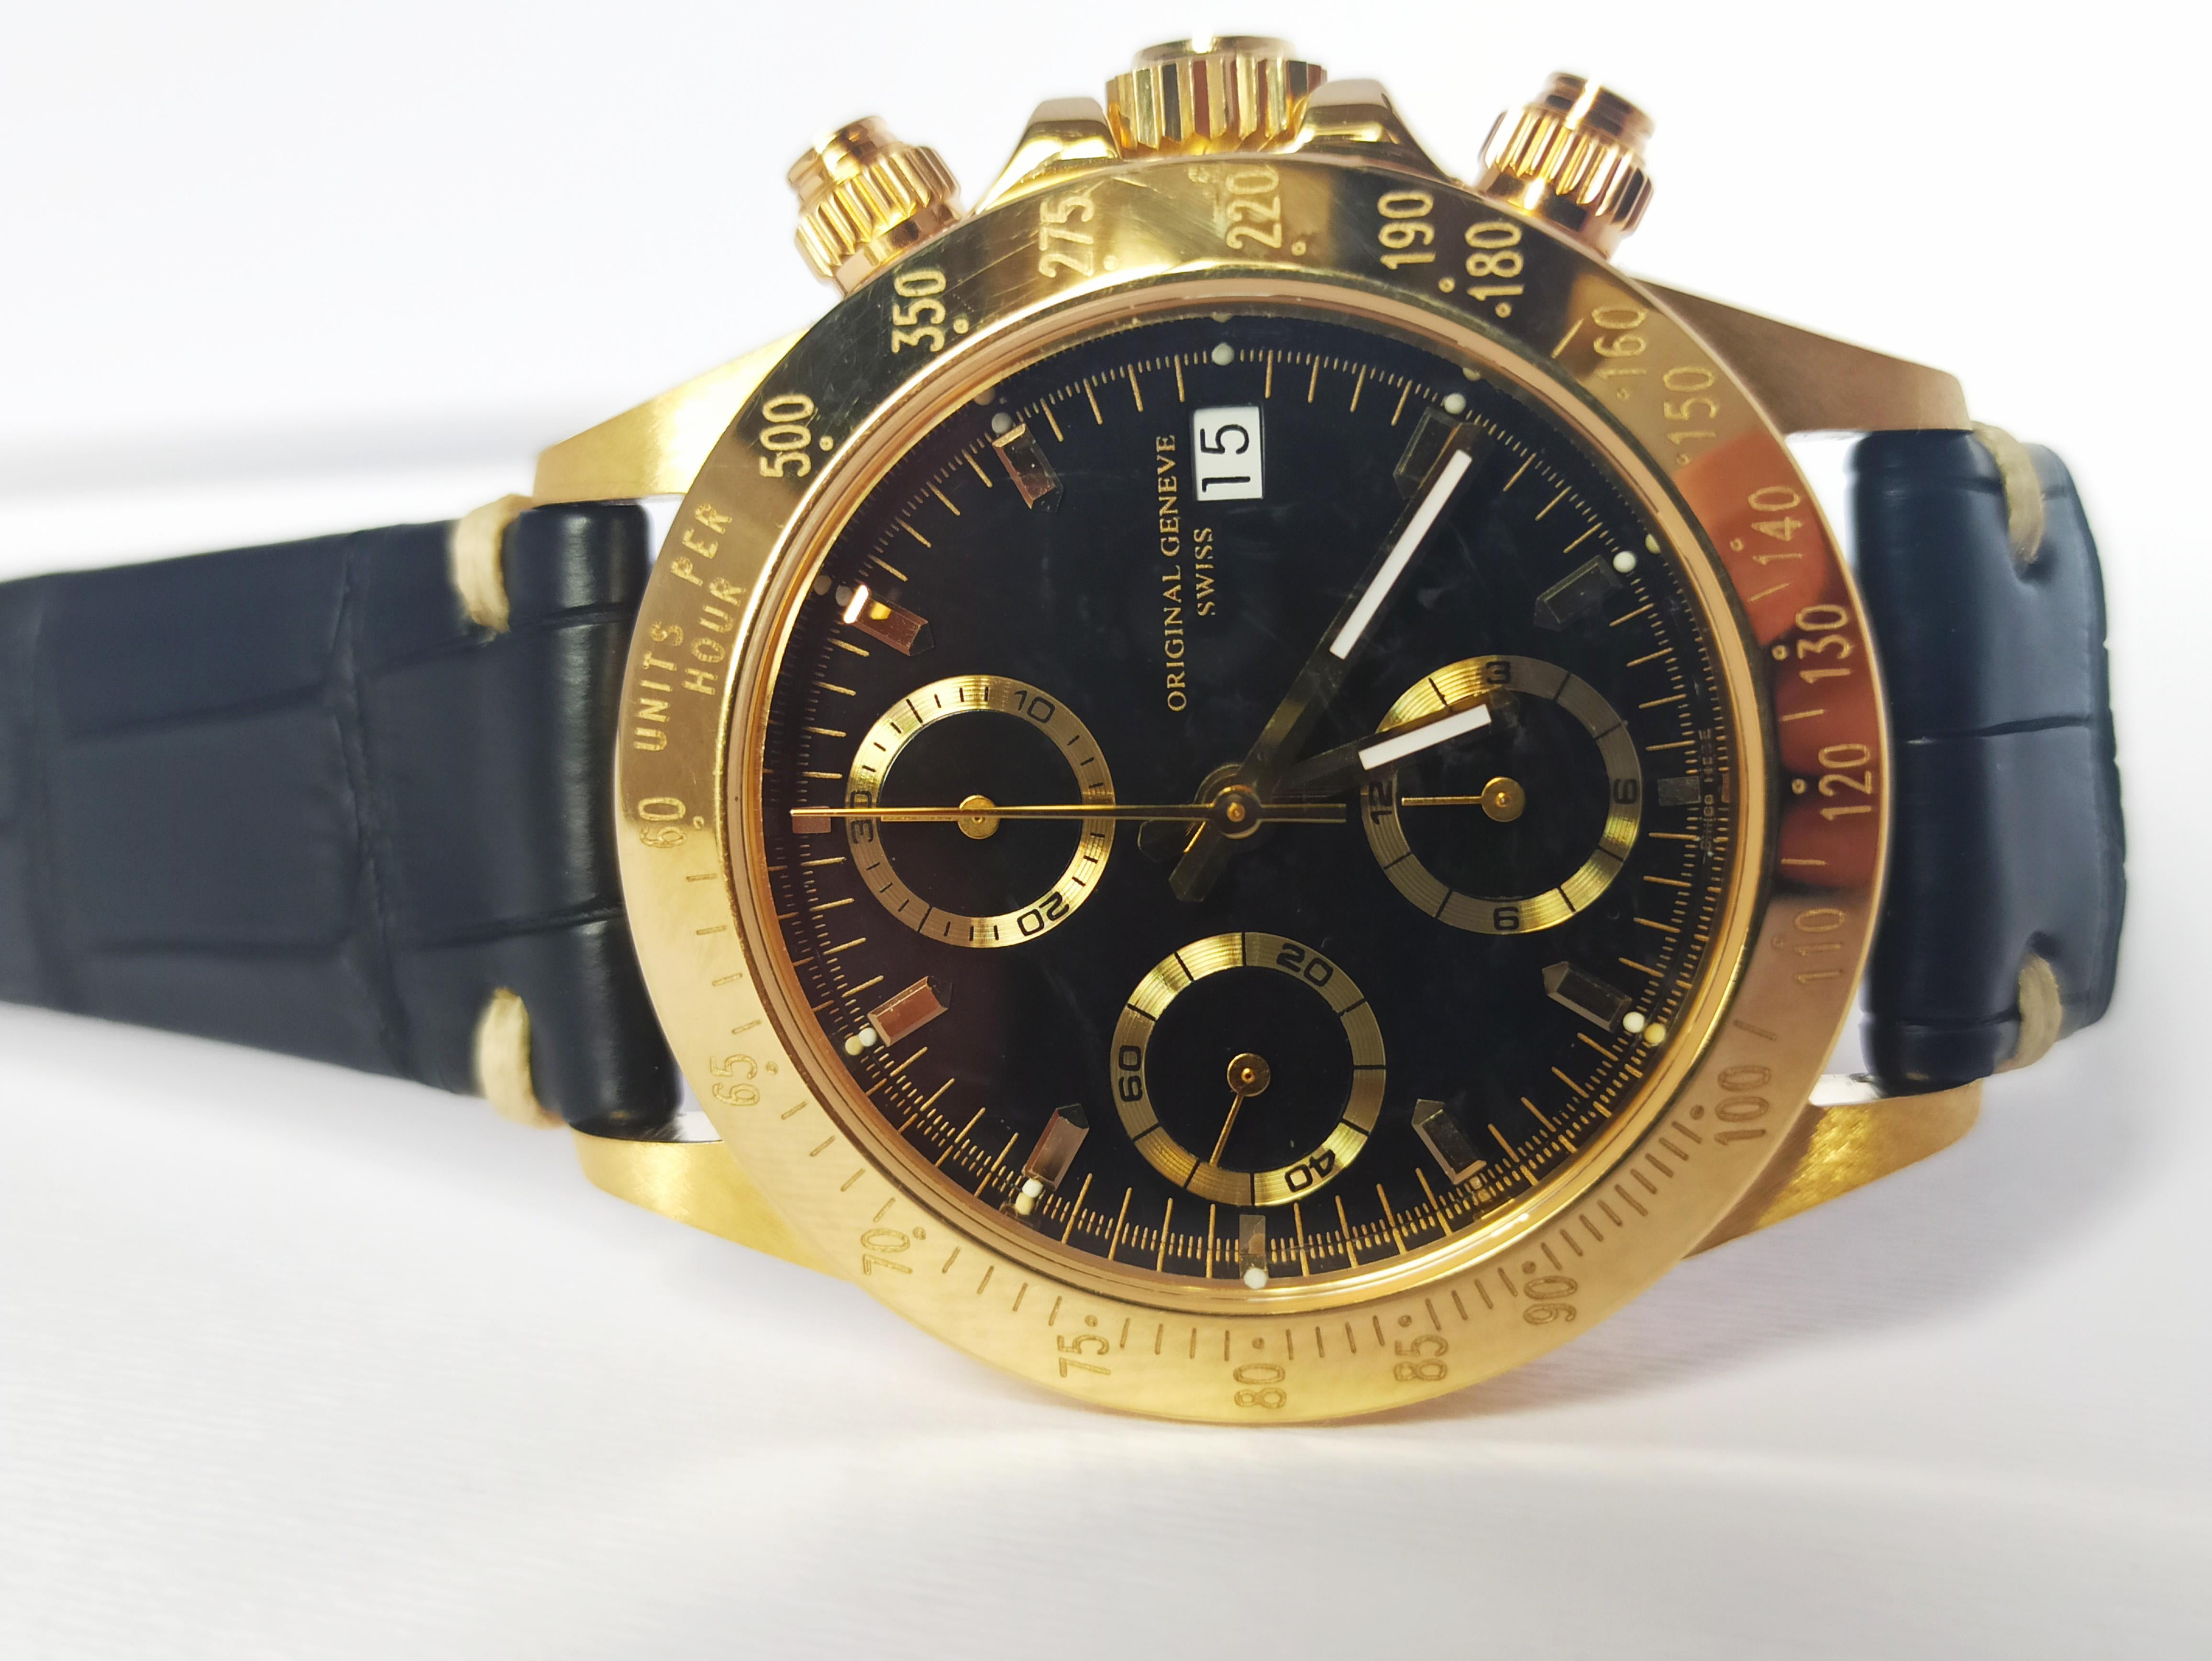 Giren Dupre' 18kt Solid Gold Daytona Style Chronograph, Leather Strap, Automatic For Sale 5